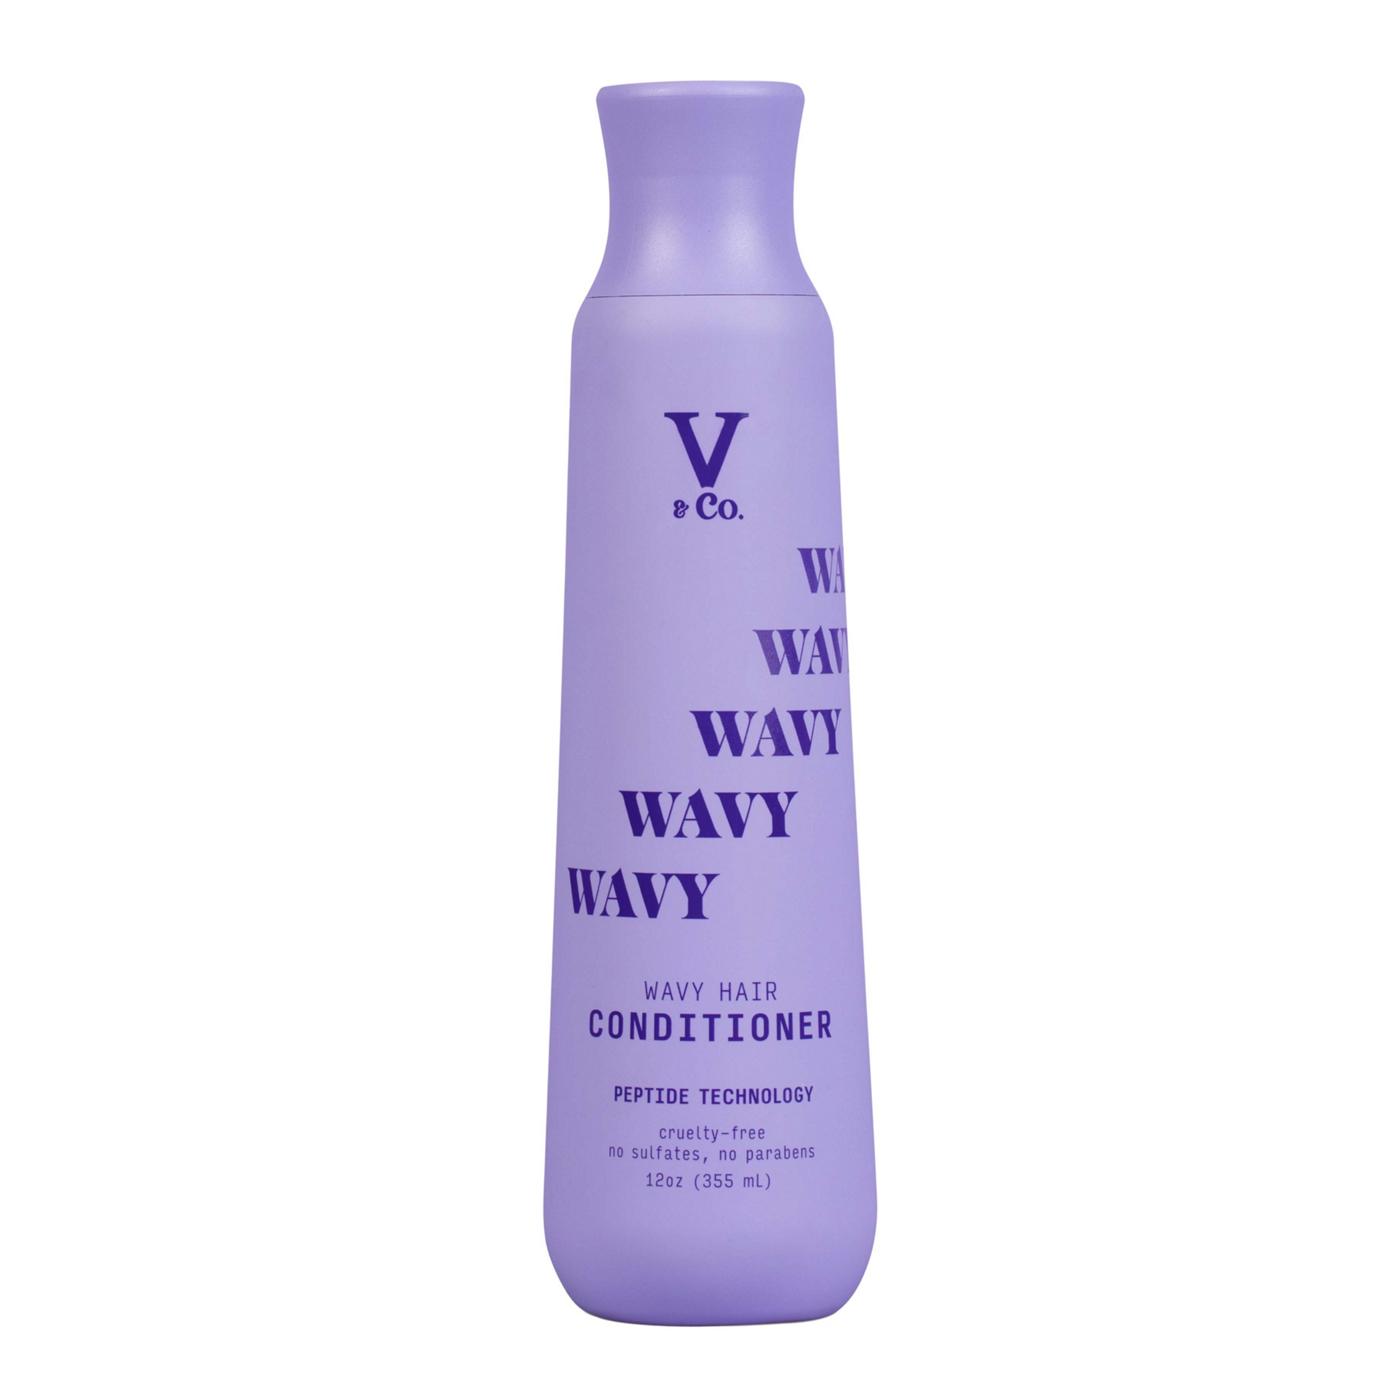 V&Co. Wavy Hair Conditioner; image 1 of 2